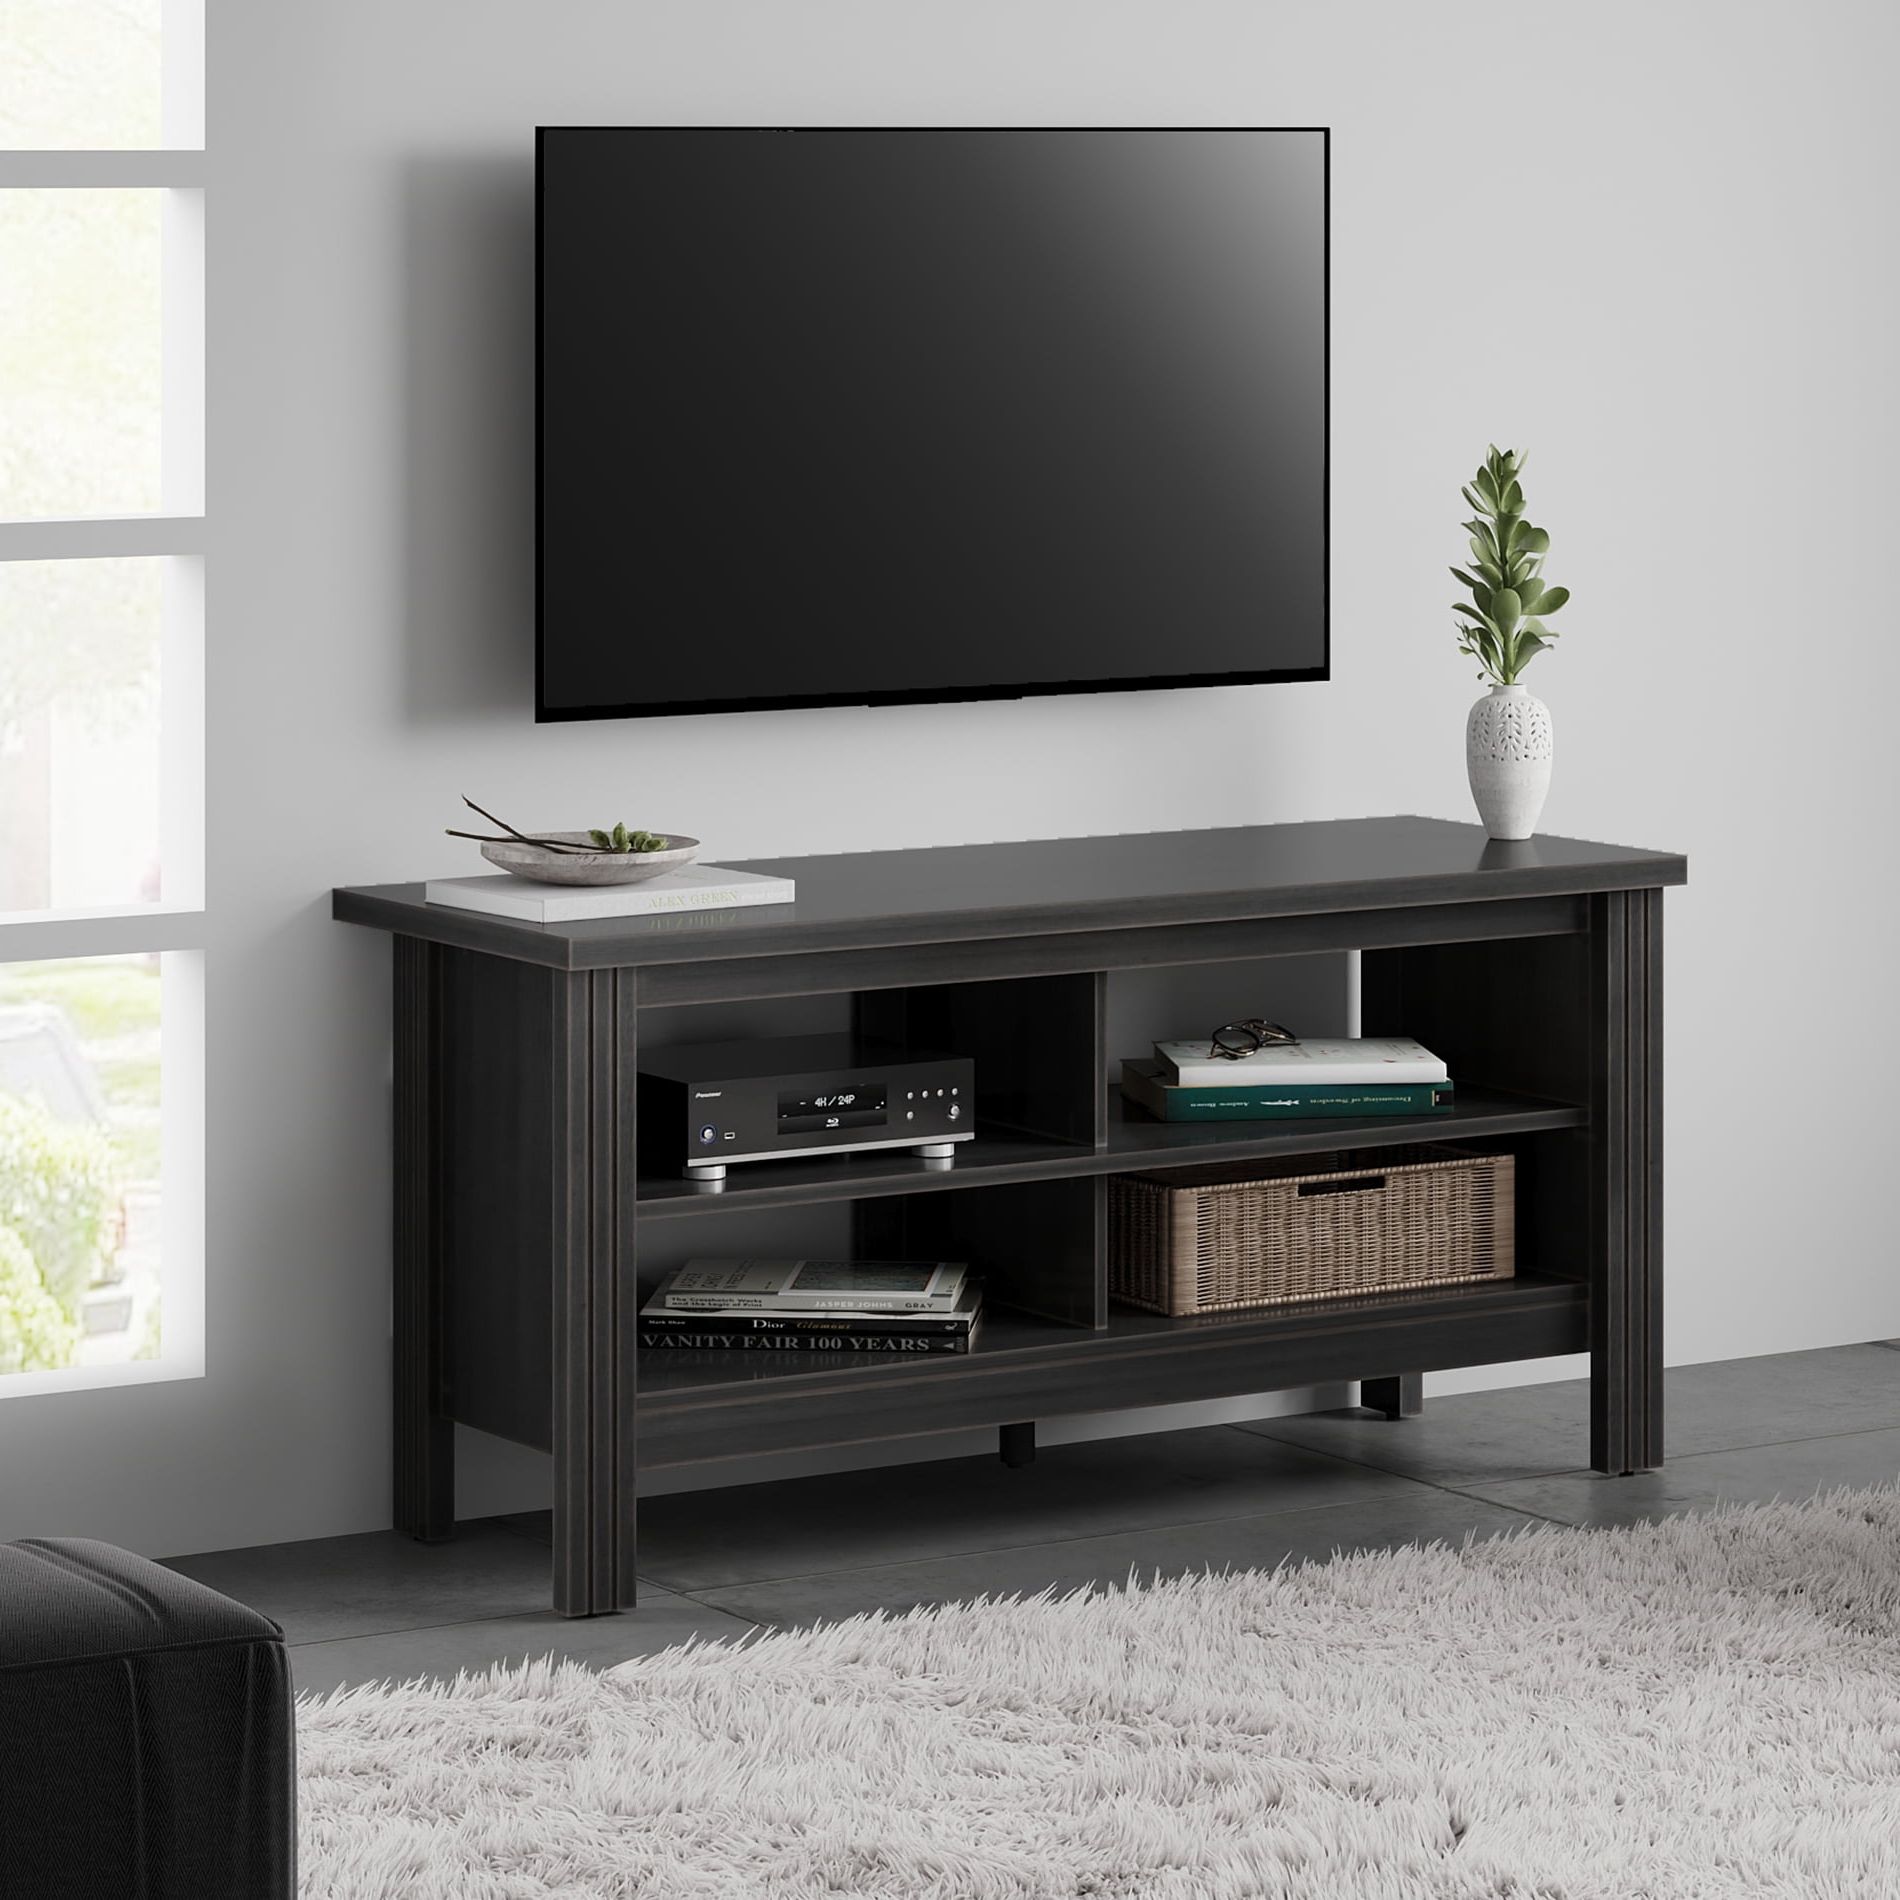 Most Recent Farmhouse Wood Tv Stands For 55 Inch Flat Screen Media Console Storage In Media Entertainment Center Tv Stands (View 15 of 15)